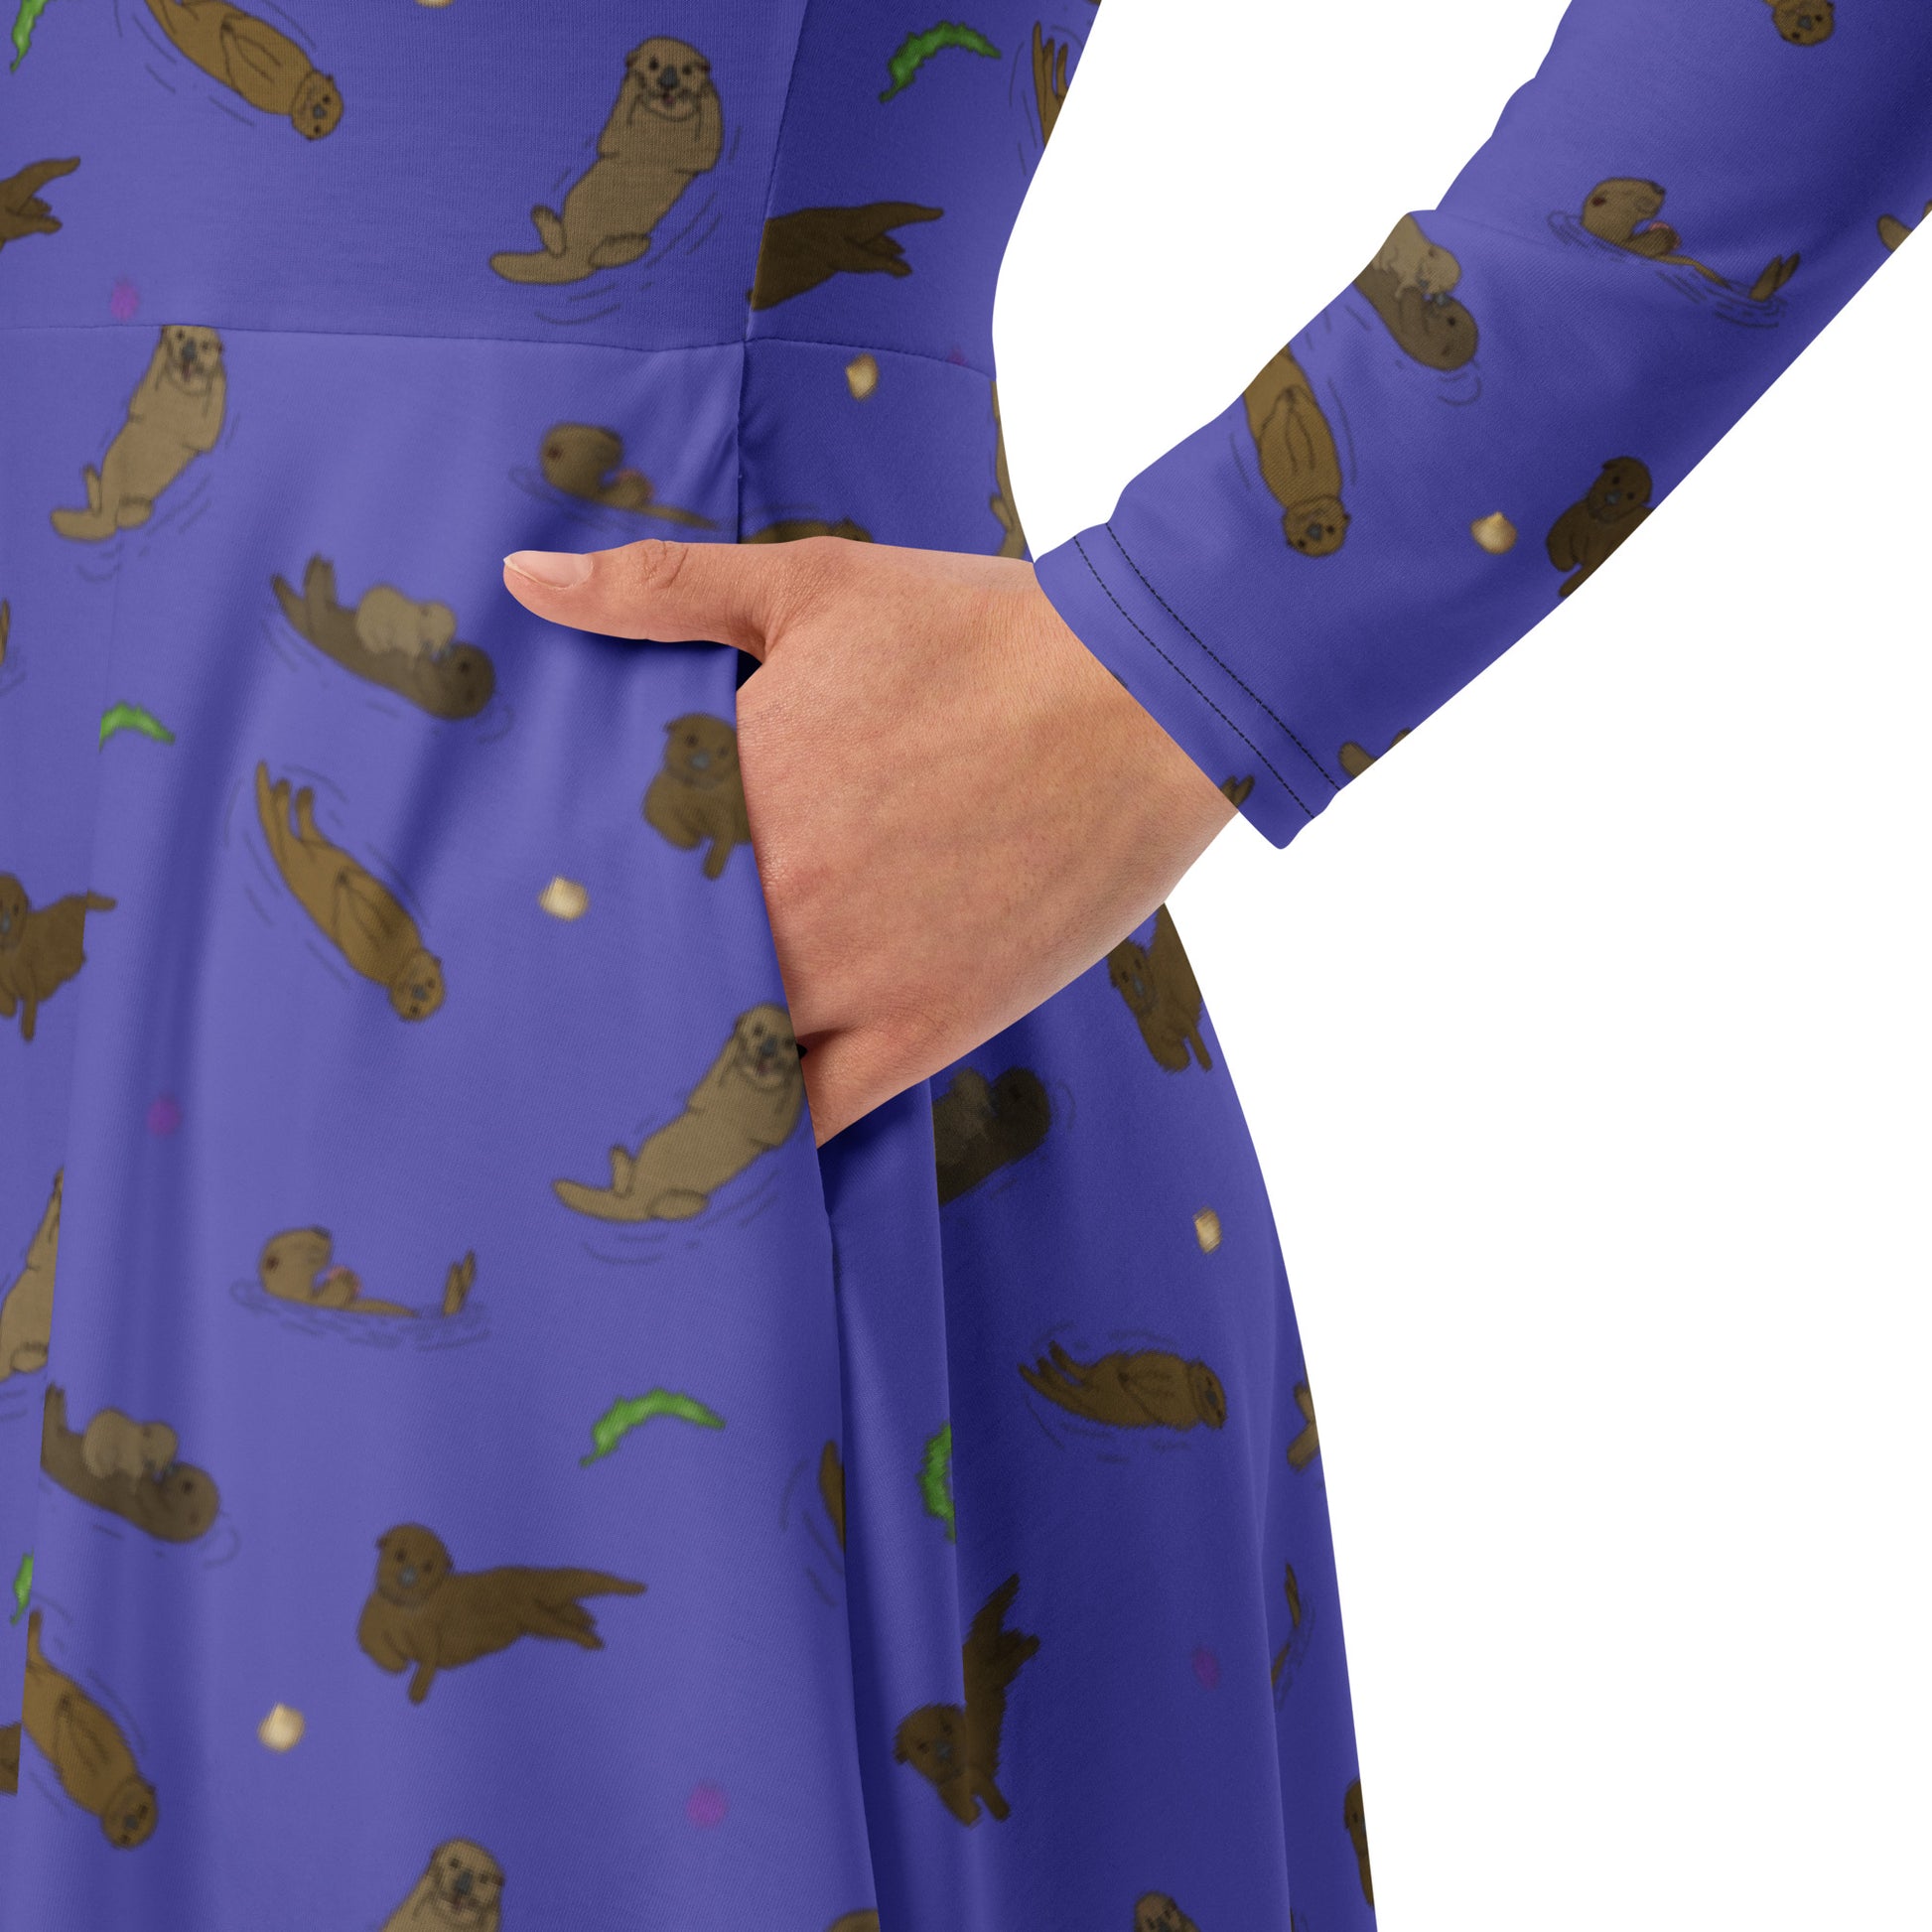 Long sleeve midi dress with fitted waist, flared bottom, and side pockets. Features a patterned design of sea otters, seashells, seaweed, and sea urchins on a purple background. Detail view of model's hand in pocket.